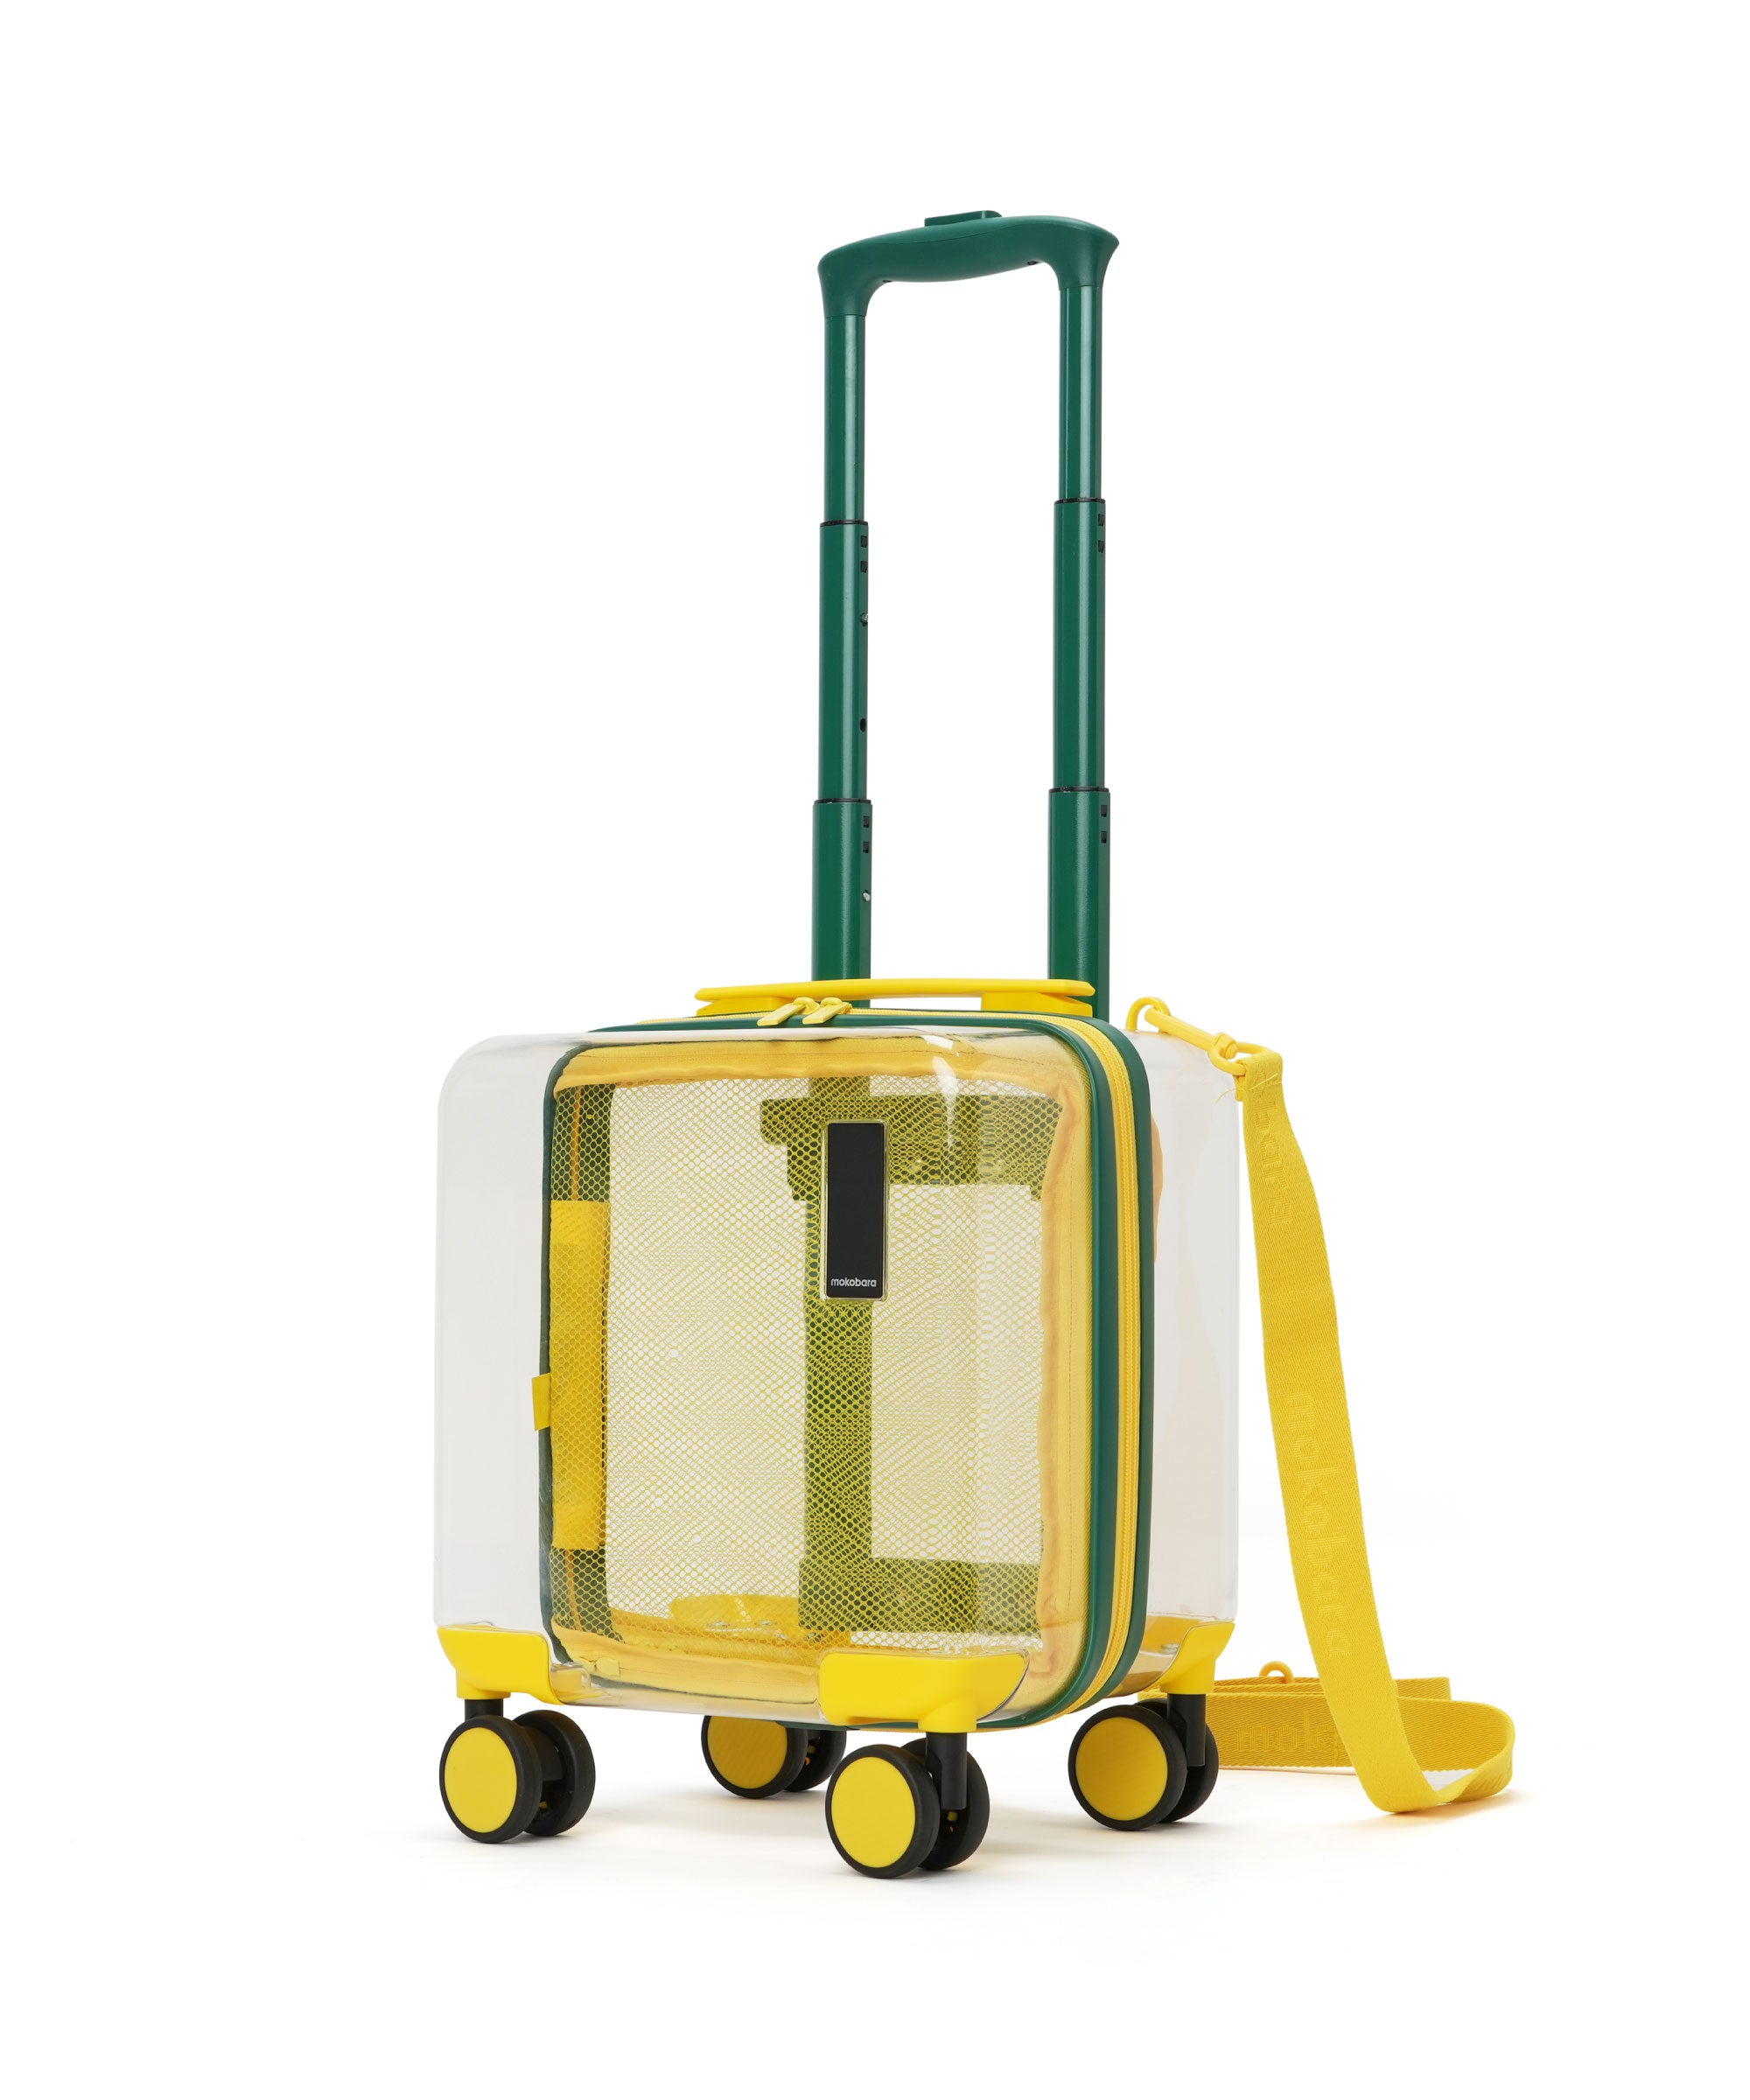 Buy Children's Luggage Trolley Bag Tools Deluxe Tool Set Online at Low  Prices in India - Amazon.in